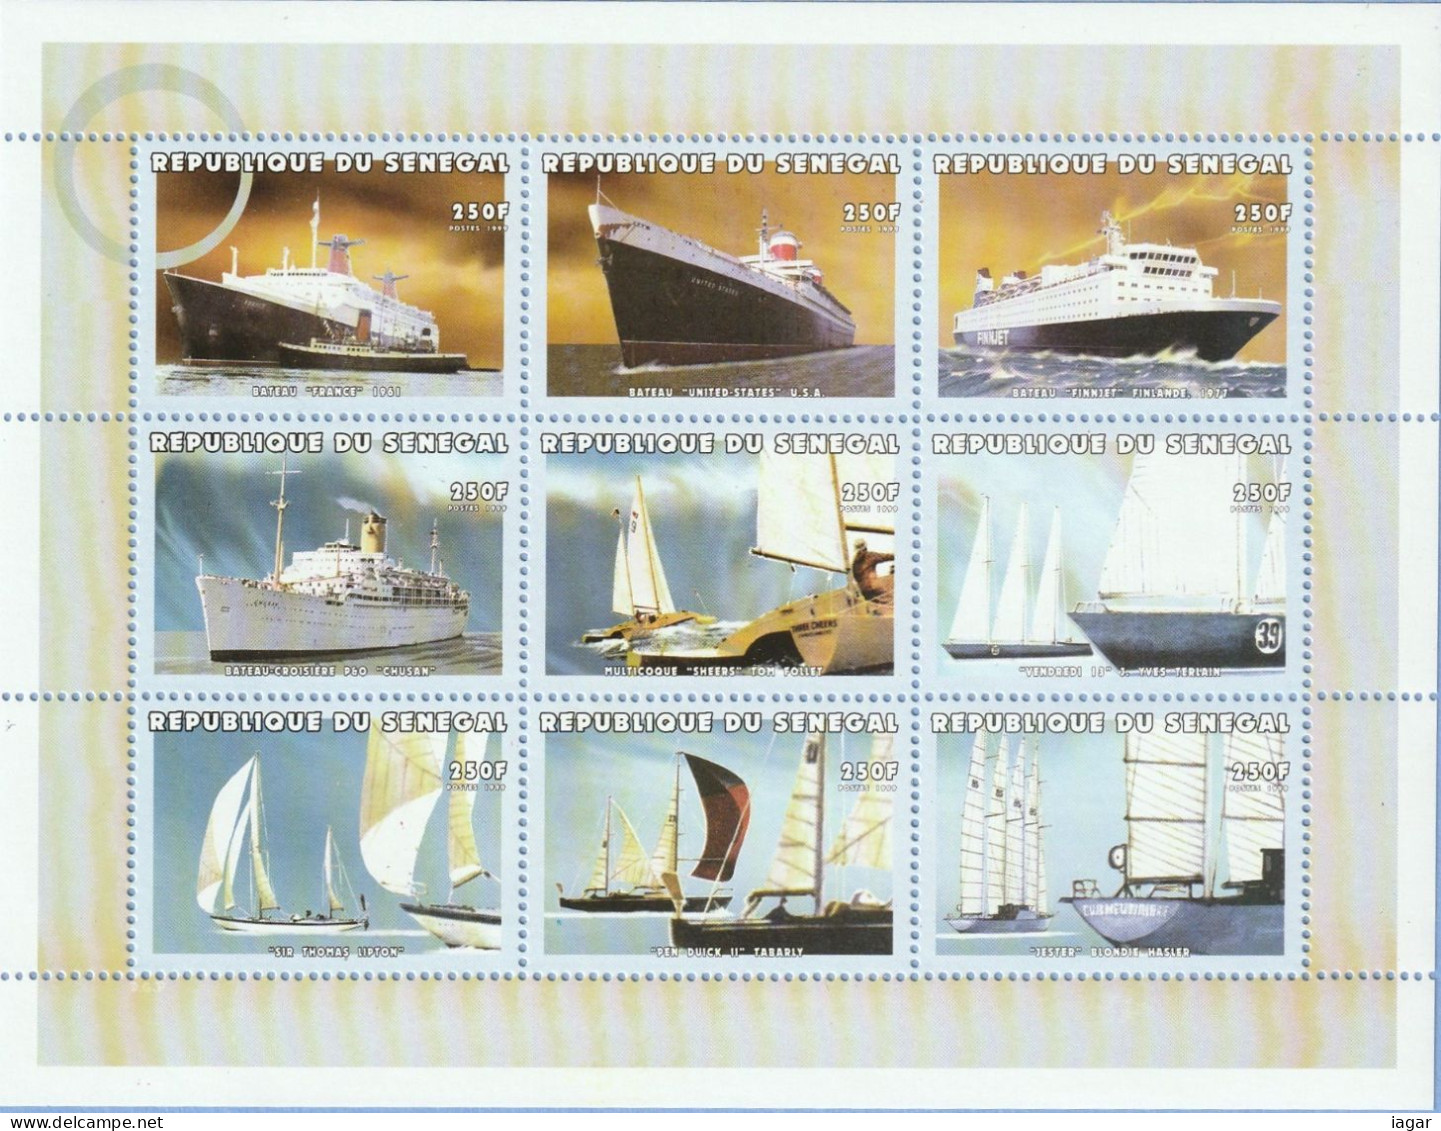 THEMATIC TRANSPORT: HISTORIC SHIPS AND FAMOUS SAILING SHIPS. LE"FRANCE", "UNITED STATES", "PEN DUICK II"  Etc  - SENEGAL - Sonstige (See)